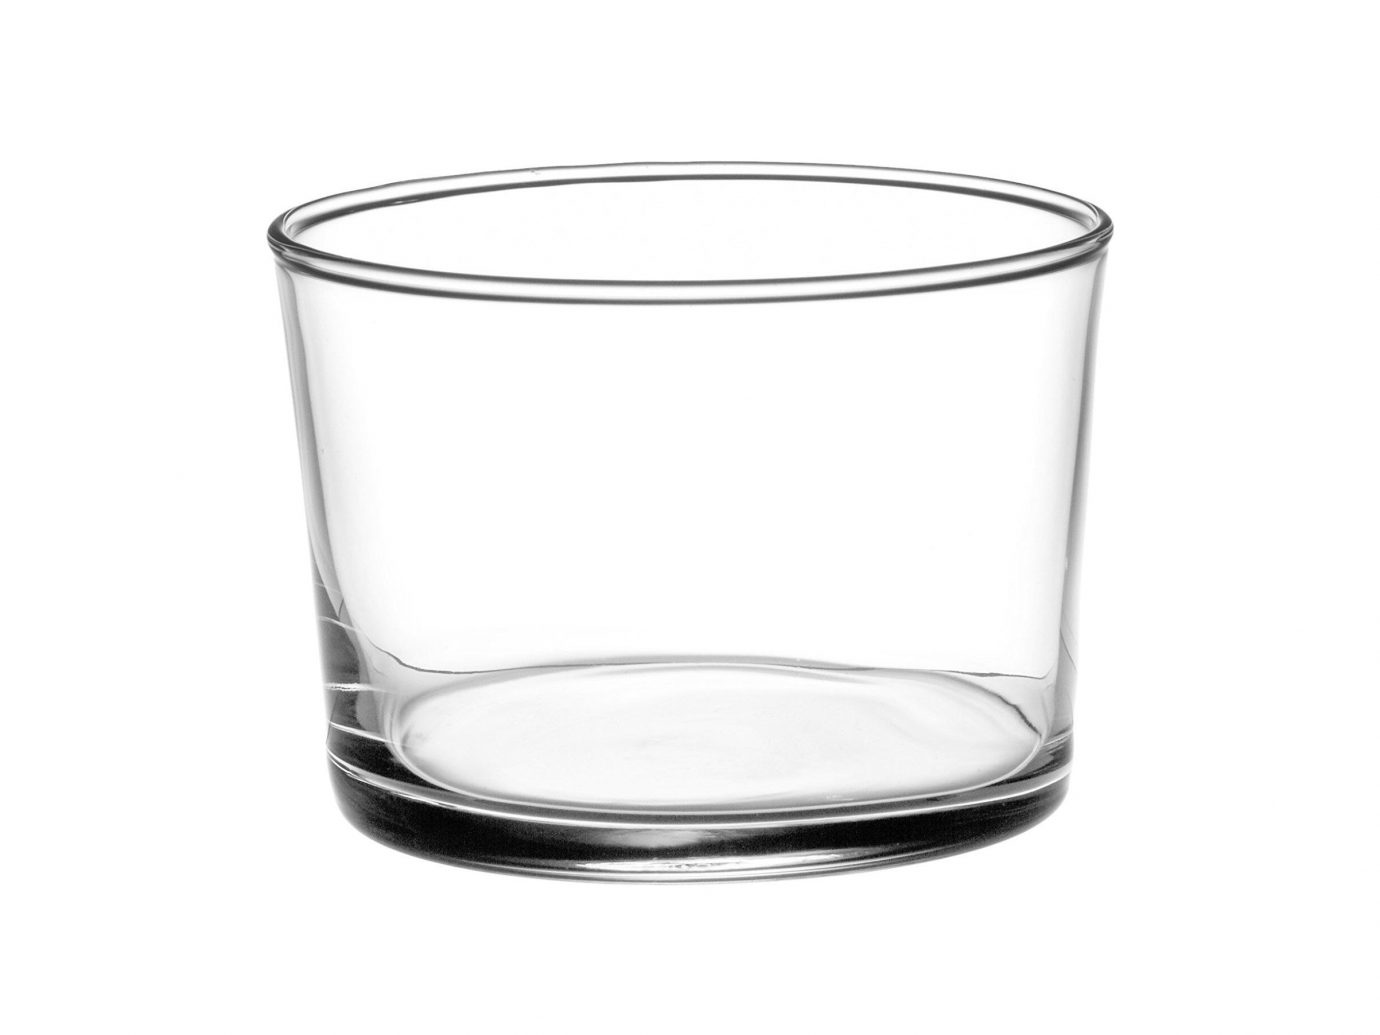 City Copenhagen Kyoto Marrakech Palm Springs Style + Design Travel Shop Tulum cup glass table container highball glass tableware blender drinkware old fashioned glass Drink device product design pitcher product pint glass barware plastic stemware tumbler empty wine glass clear gauge